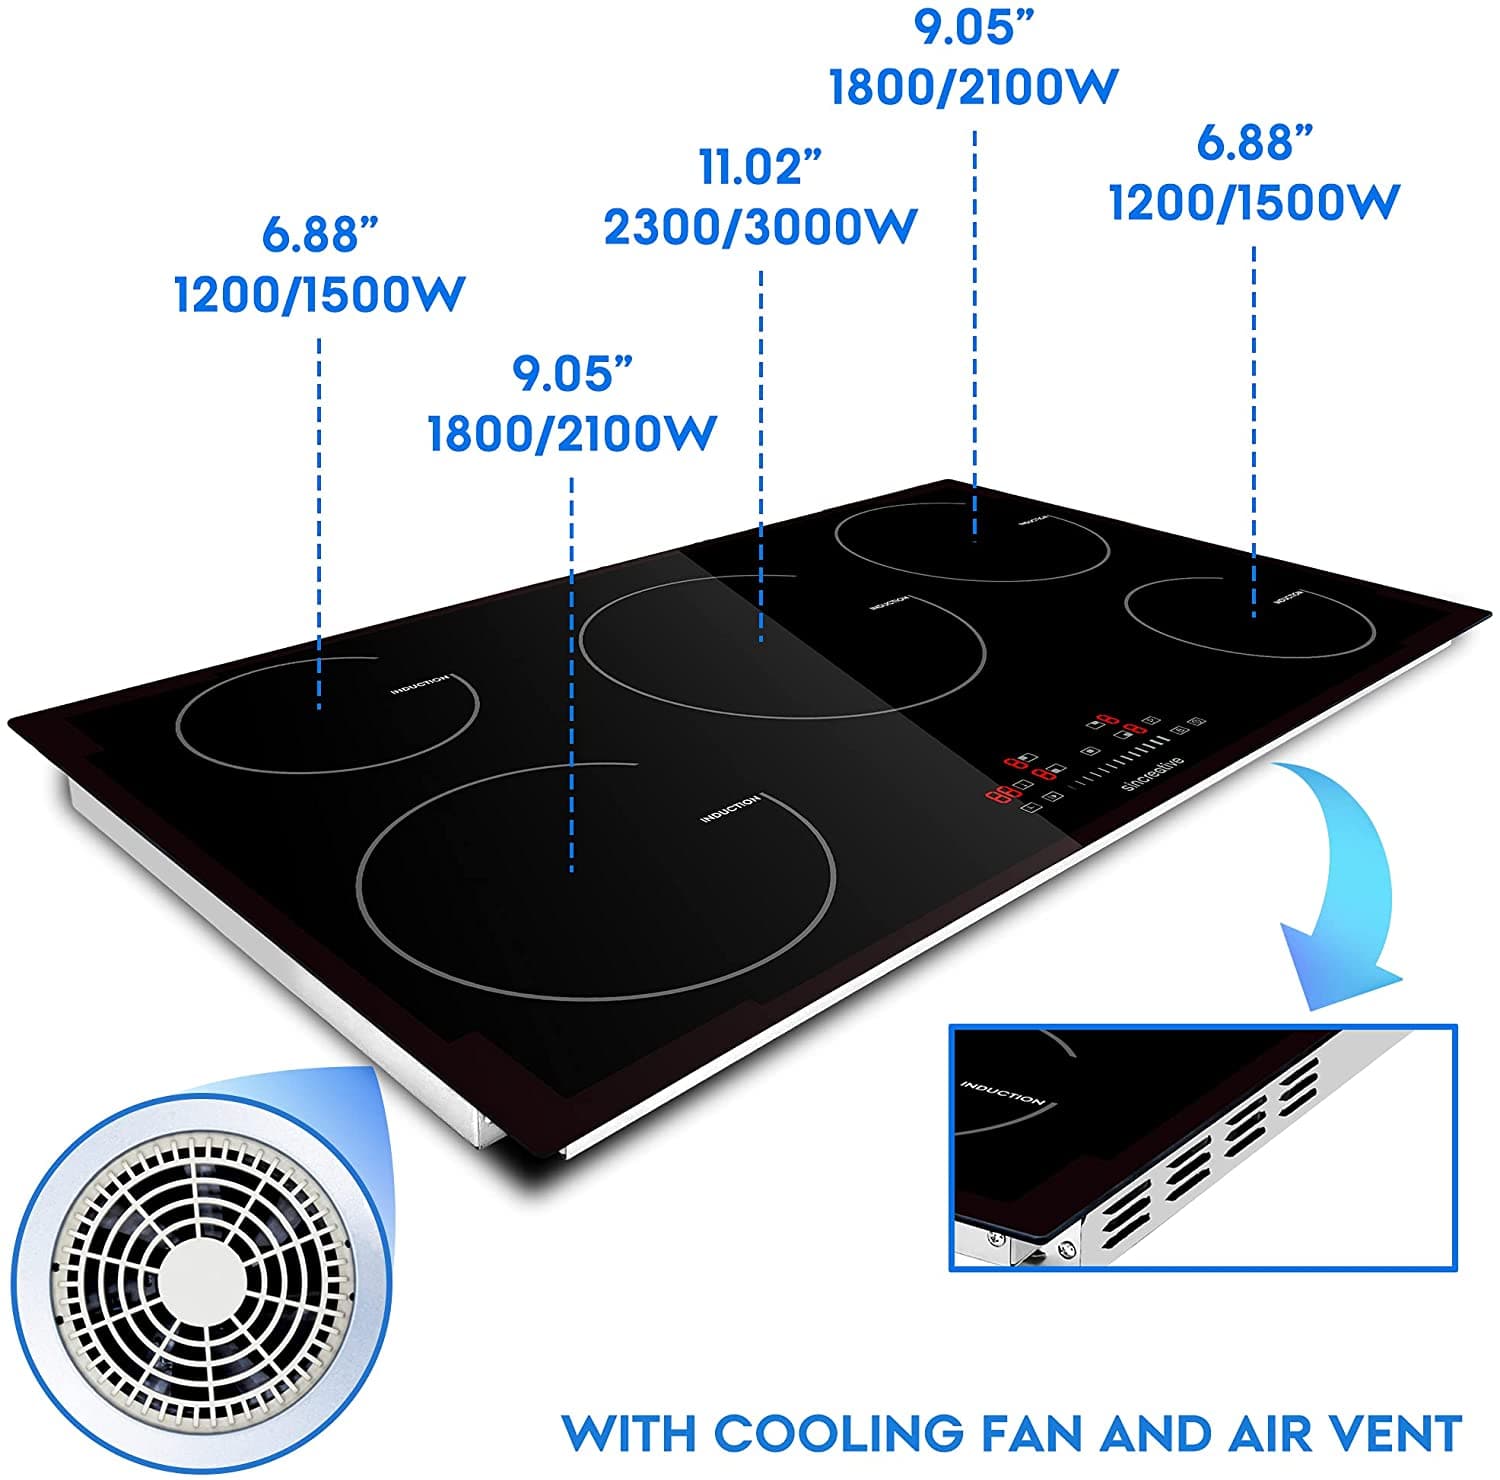 36-inch Functional Safe and Fast-Heat Induction Cooktop